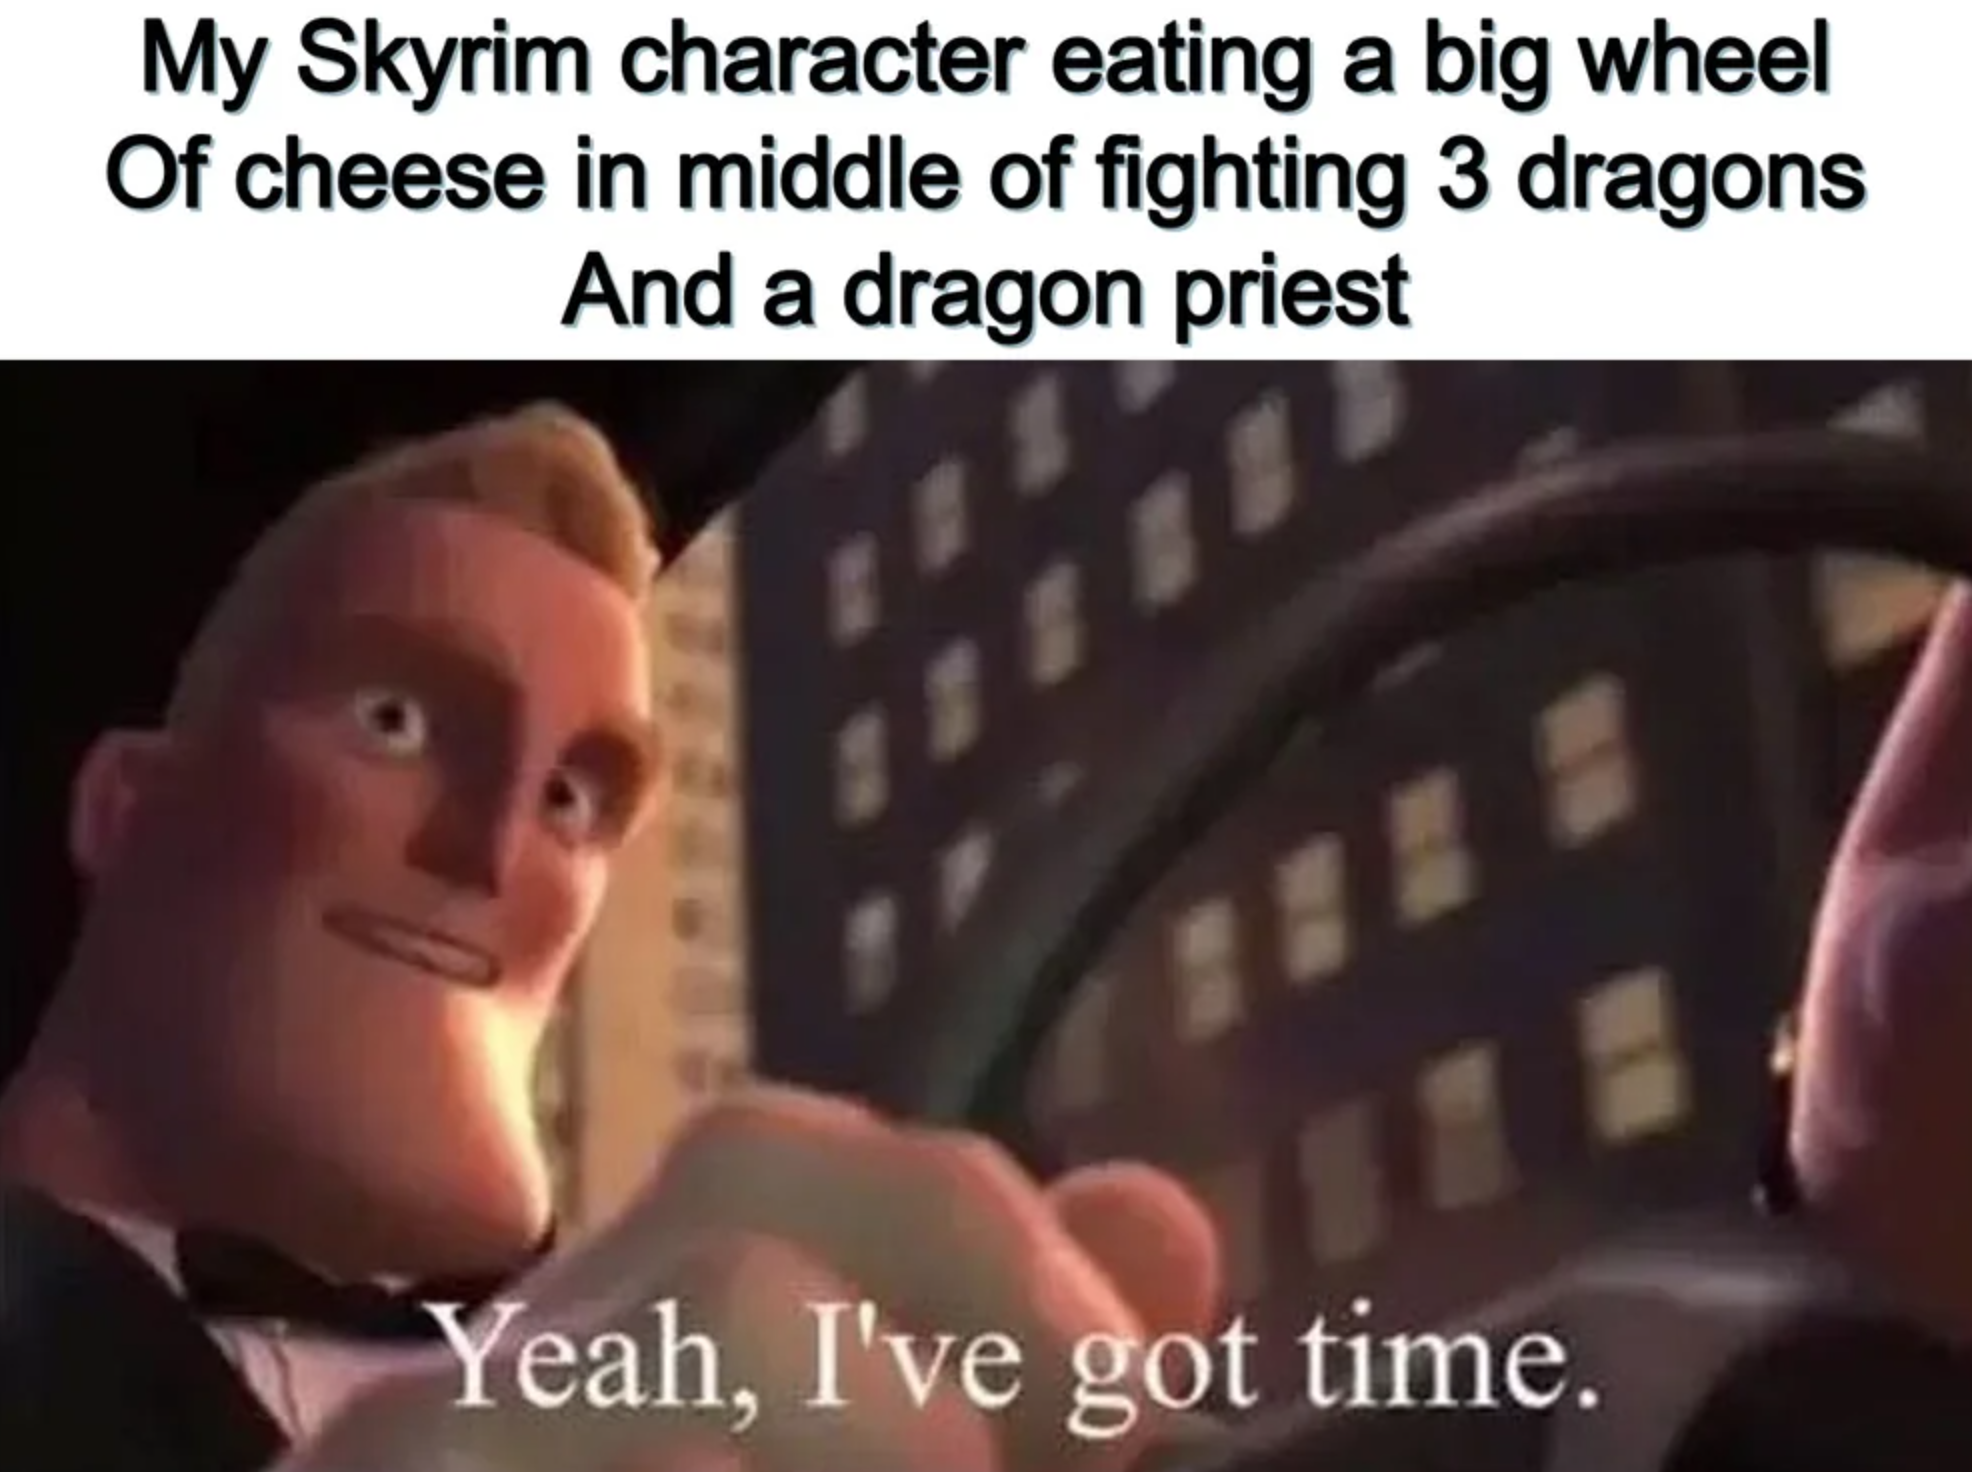 funny gaming memes - baseball boring - My Skyrim character eating a big wheel Of cheese in middle of fighting 3 dragons And a dragon priest Yeah, I've got time.